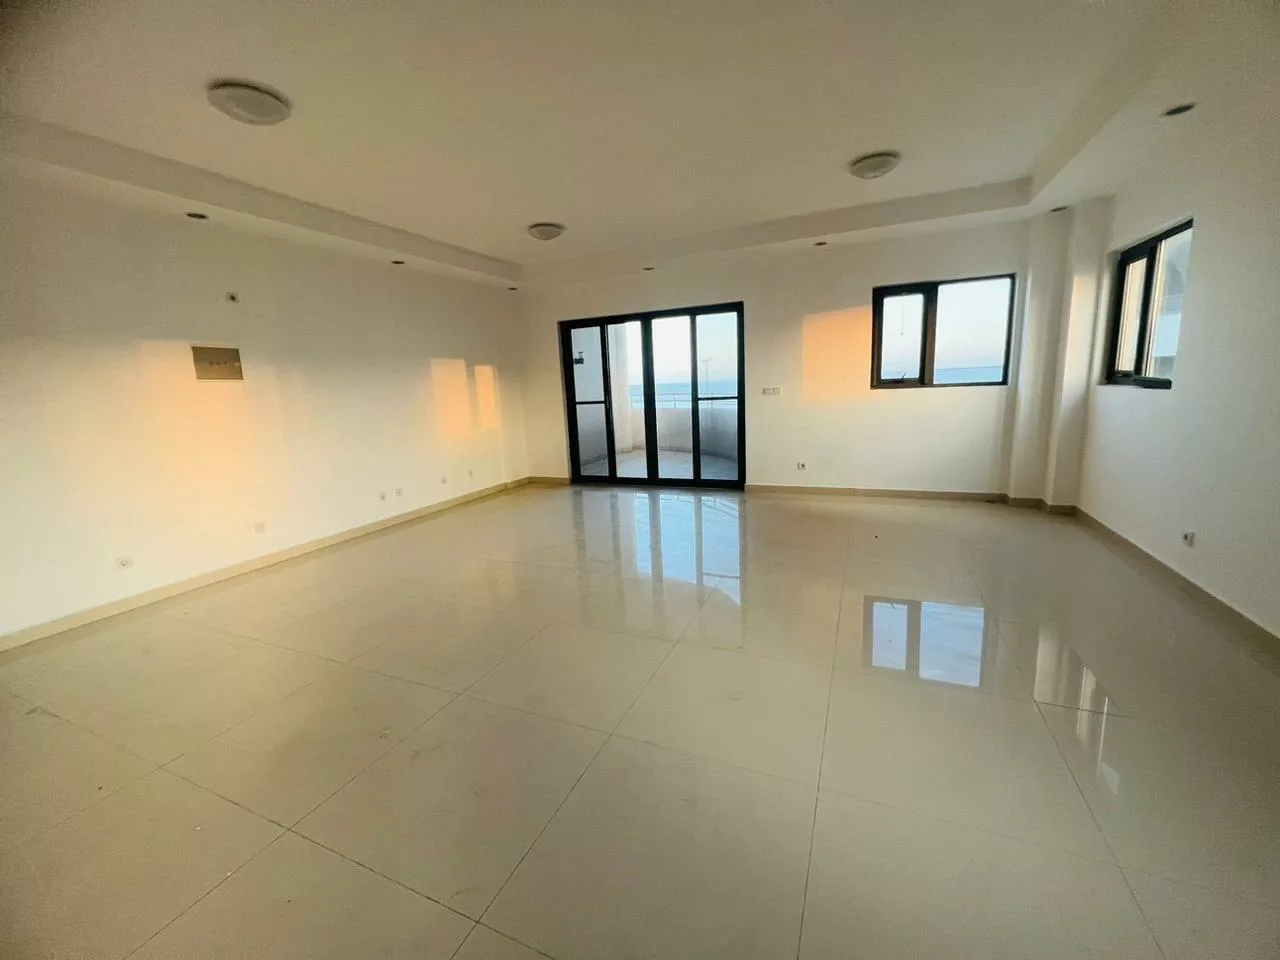 3-Bedroom Apartment for Sale with Balcony and Sea View in Condominium Karibu, Sommerschield, Maputo